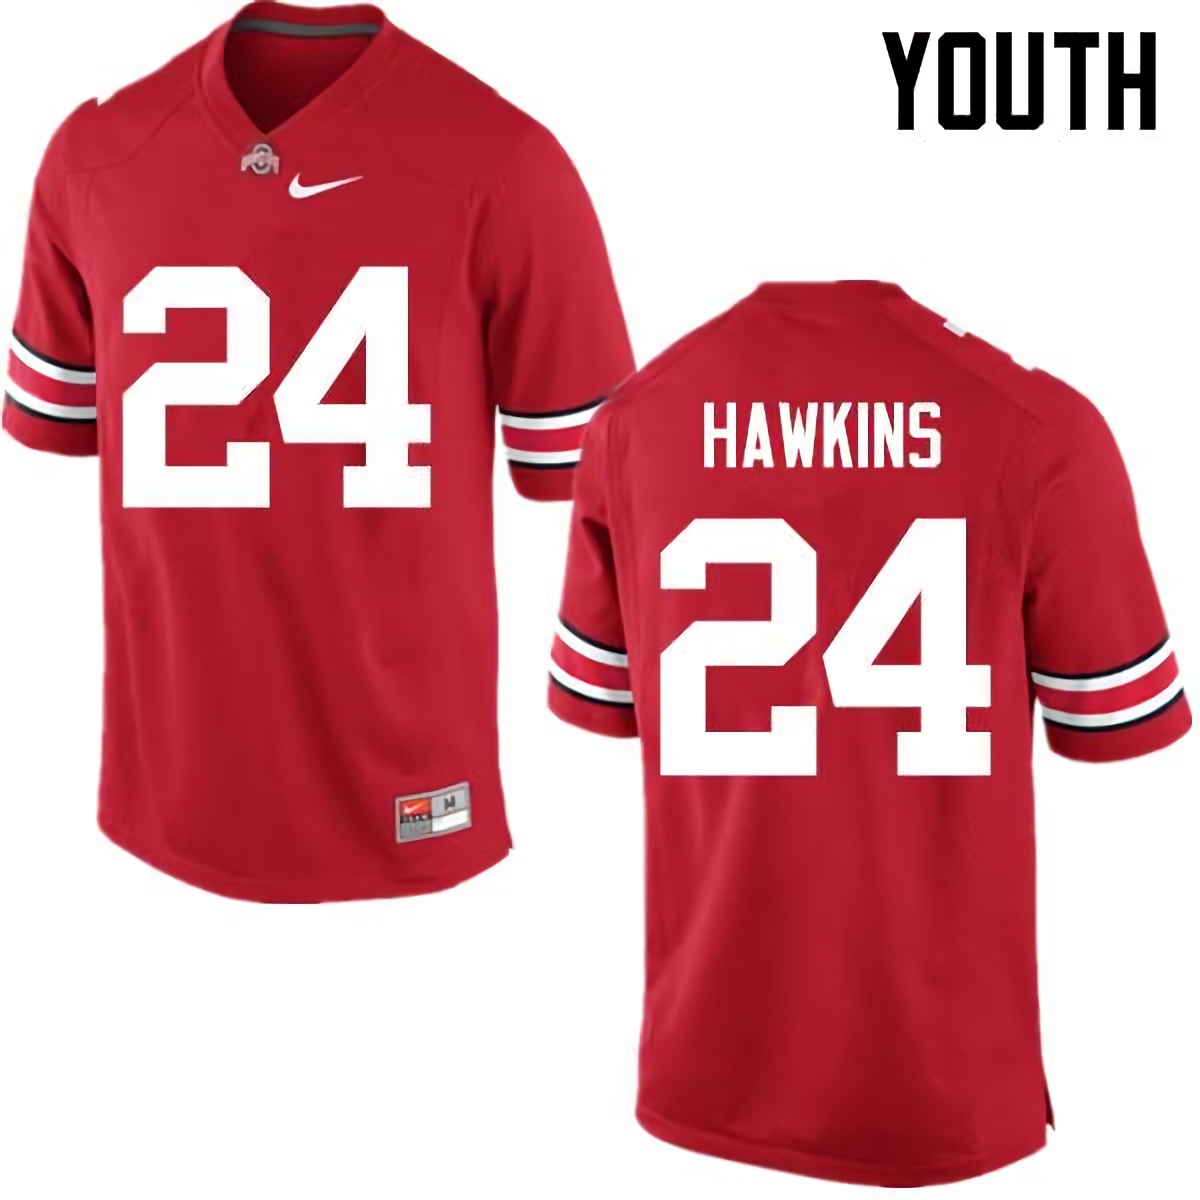 Kierre Hawkins Ohio State Buckeyes Youth NCAA #24 Nike Red College Stitched Football Jersey PMY2656US